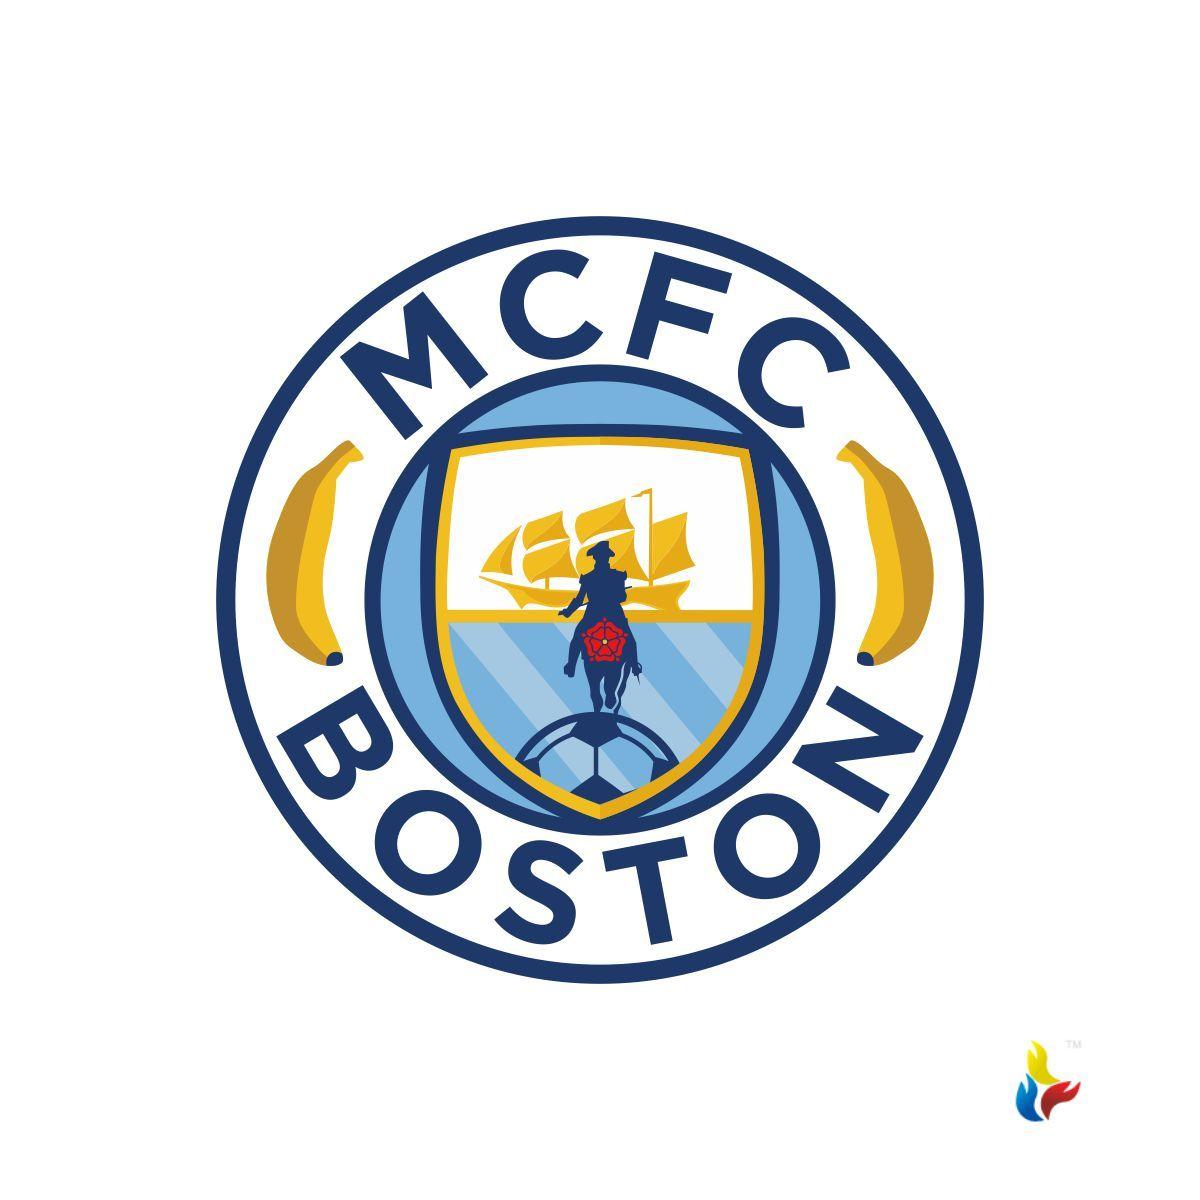 M.C.f.c Logo - Playful, Personable, Group Logo Design for MCFC Boston by Kreative ...